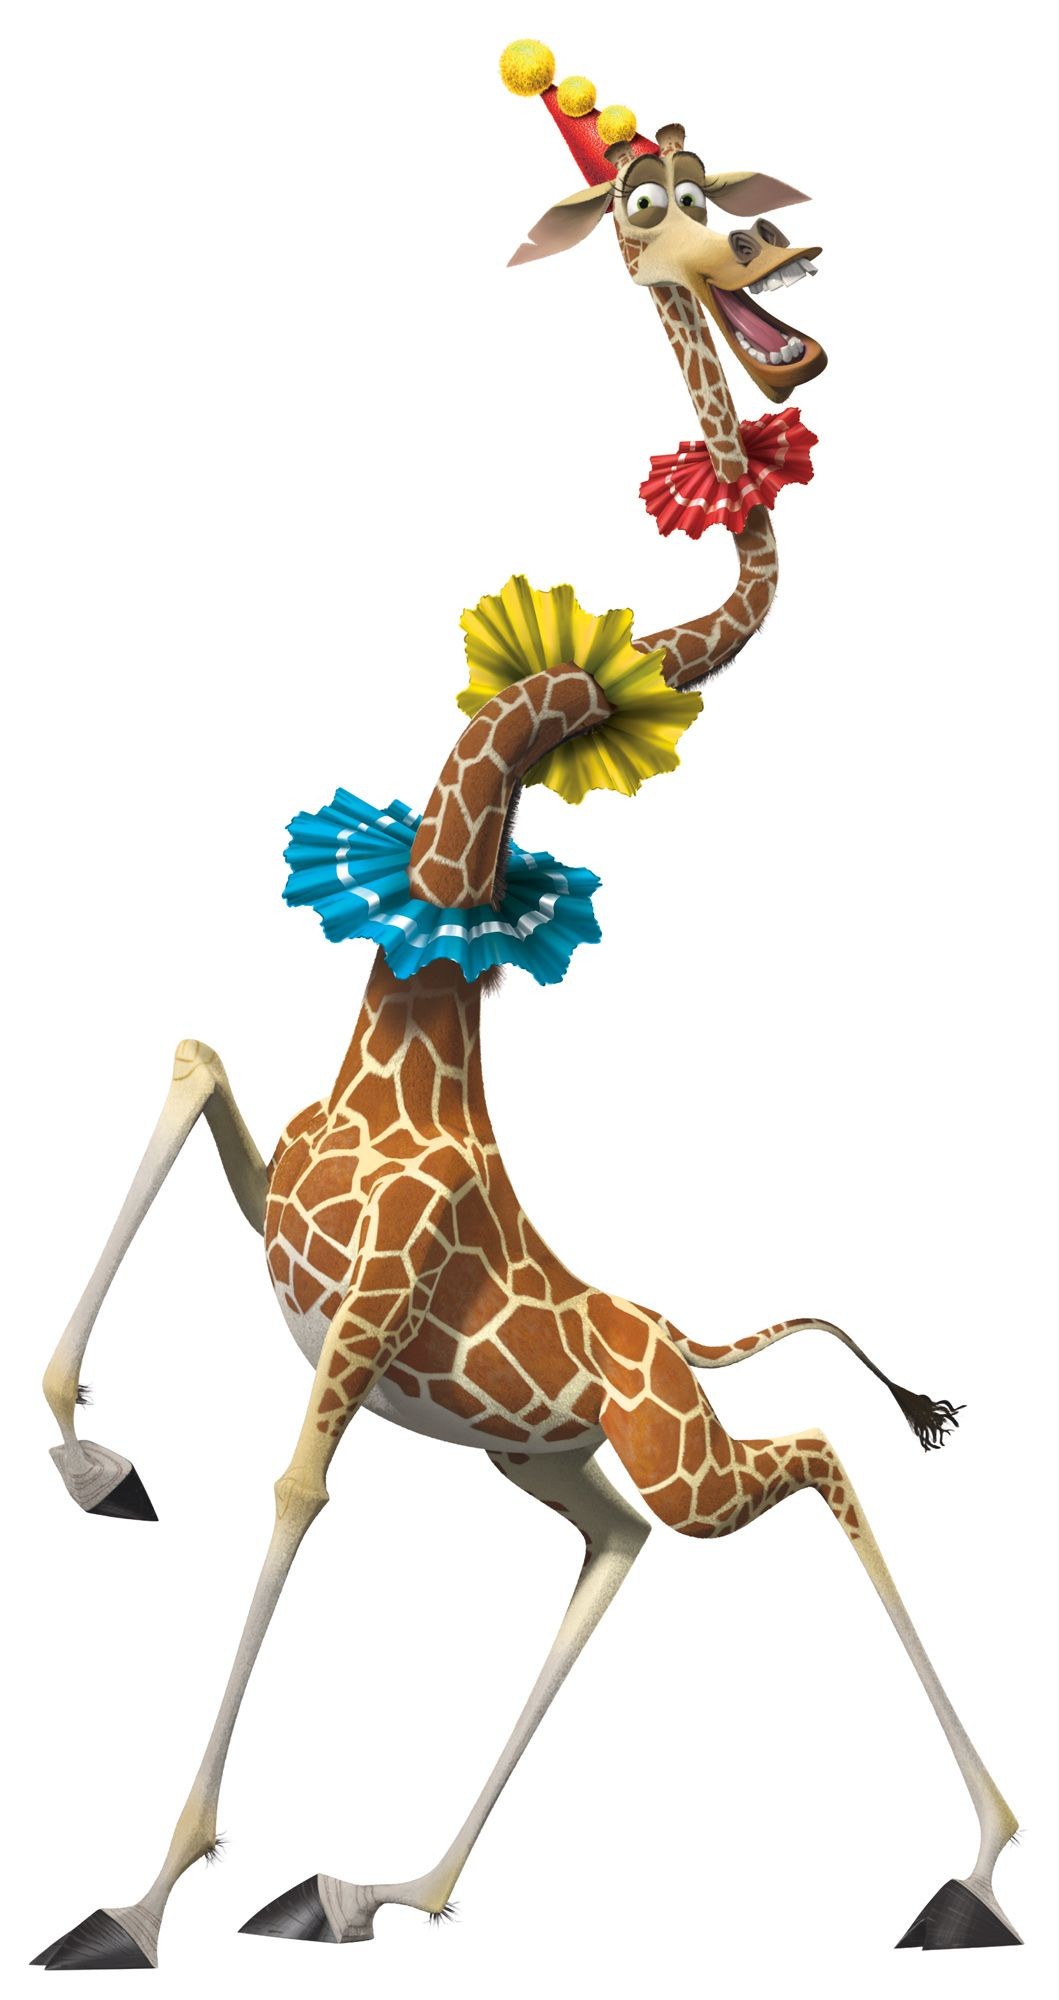 Melman the Giraffe of DreamWorks Animation's Madagascar 3: Europe's Most Wanted (2012)